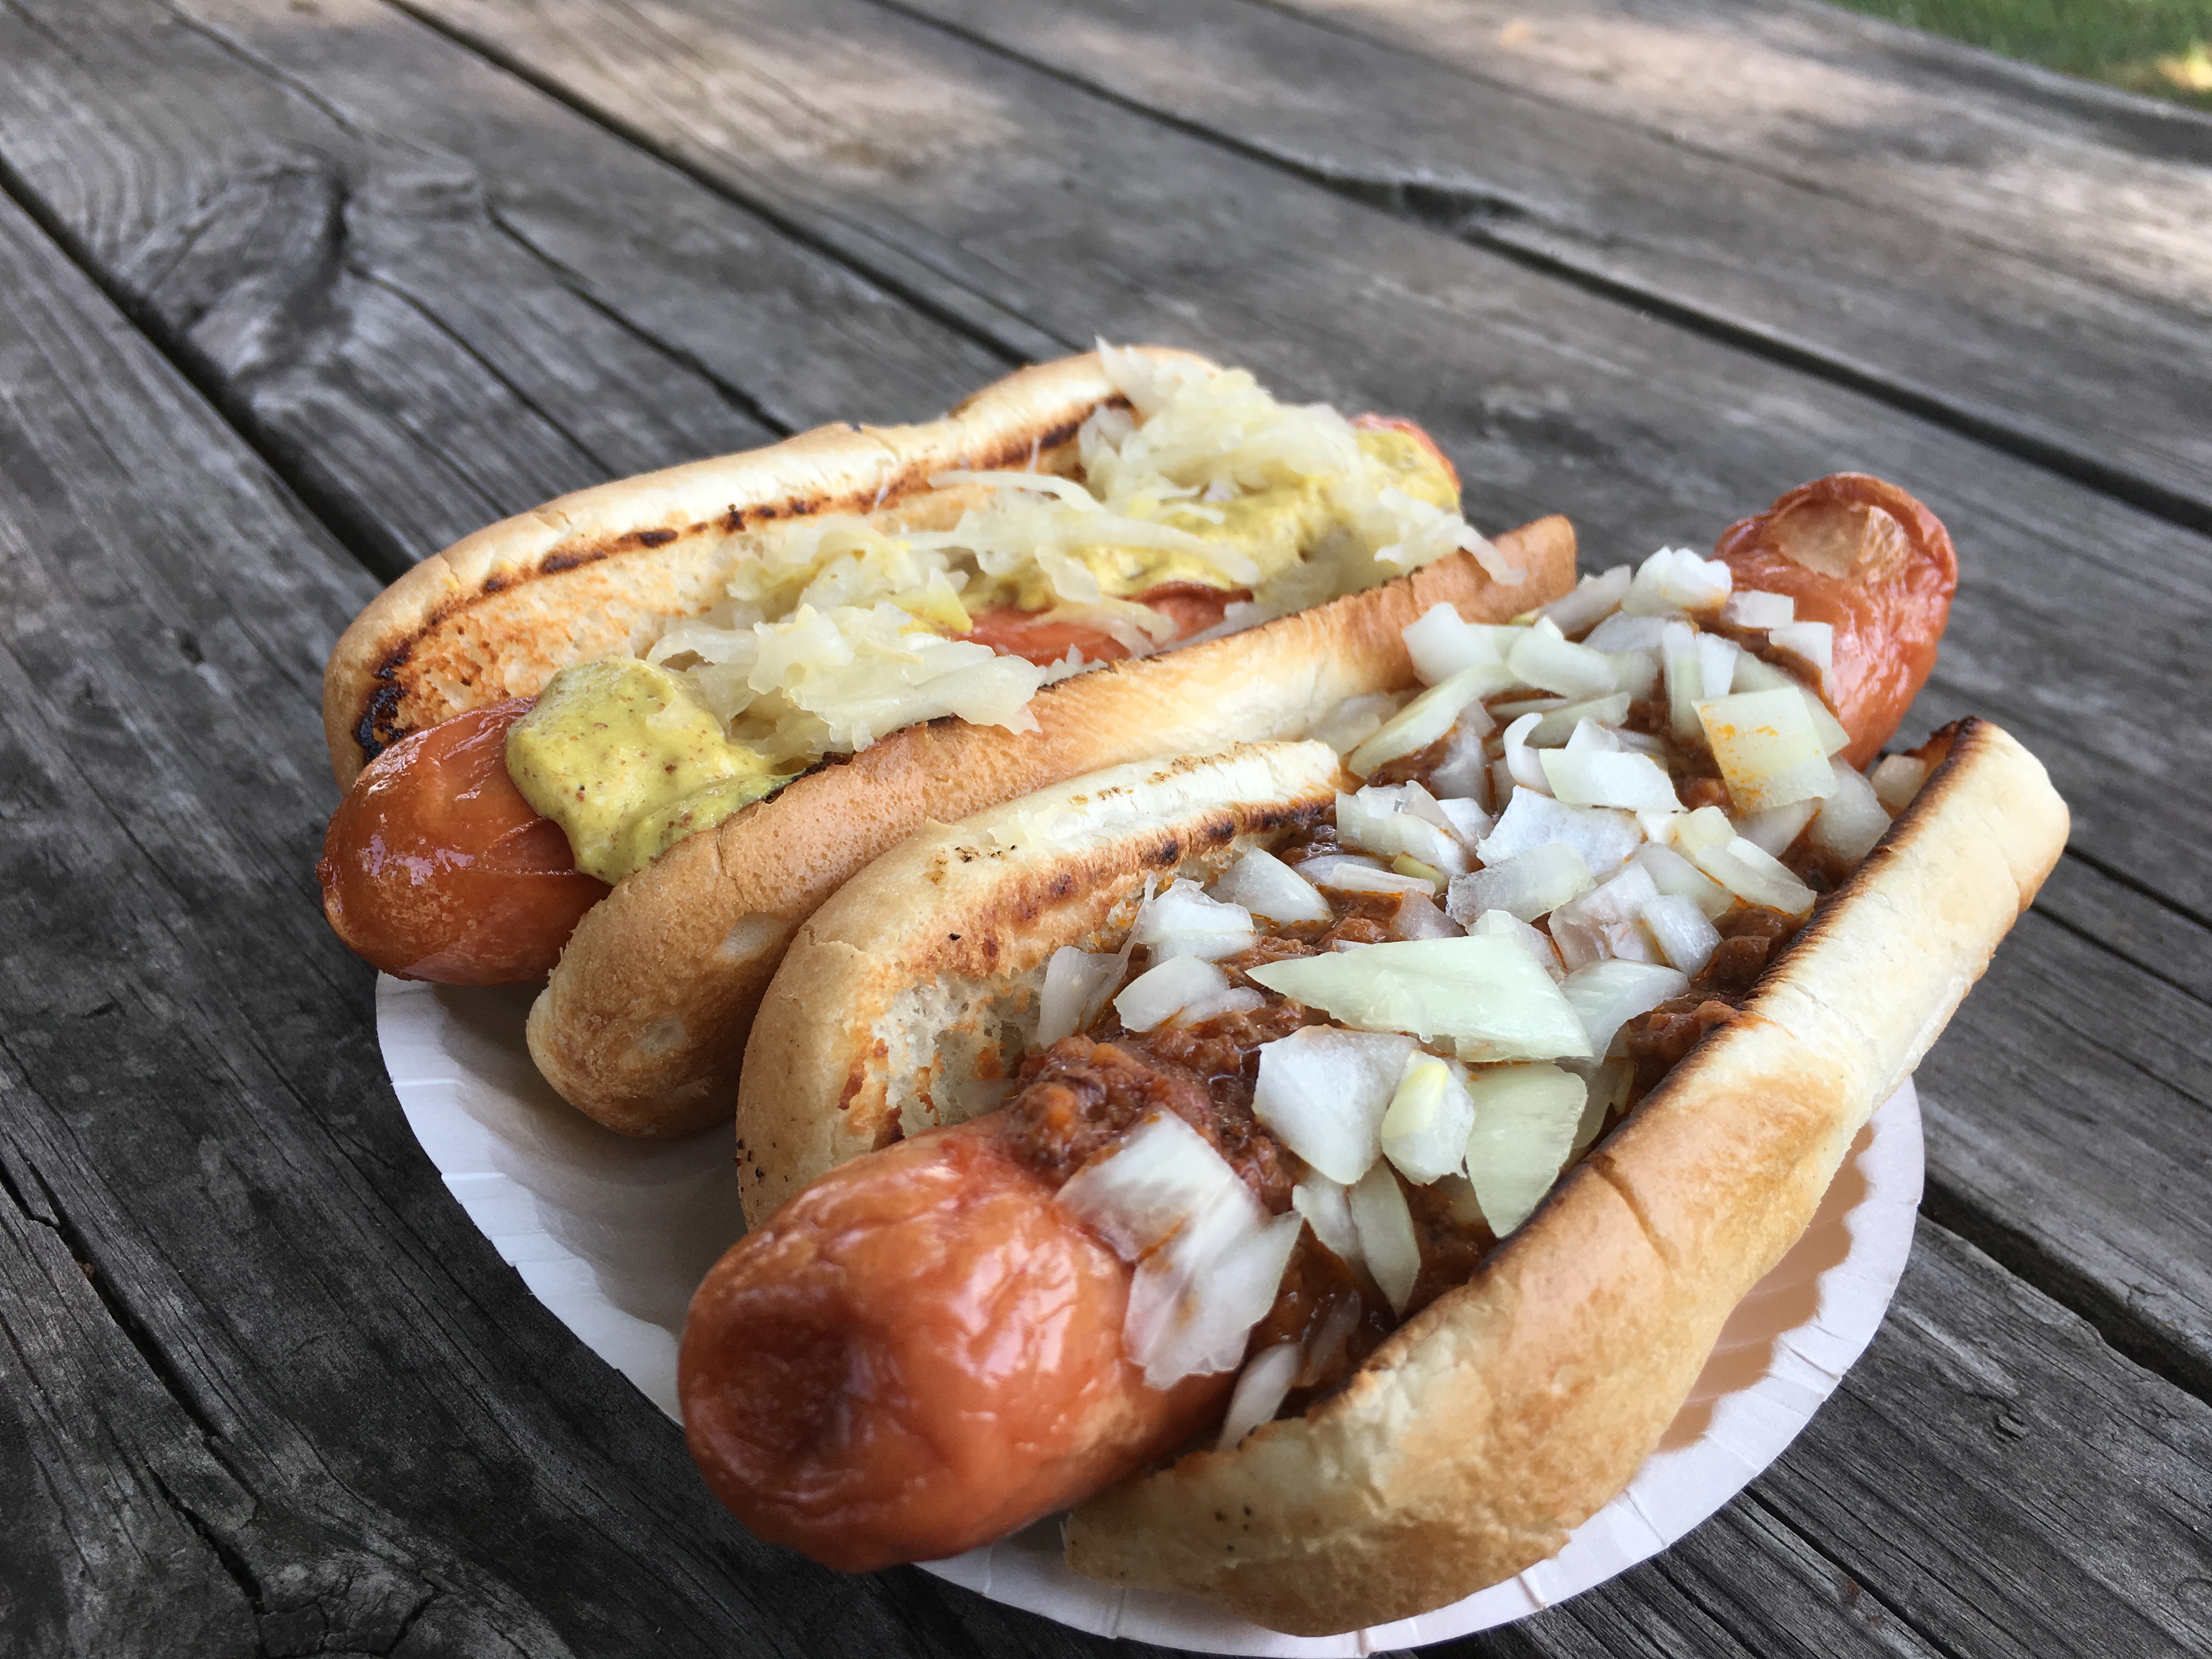 N.J.'s 40 best hot dog joints, ranked, for National Hot Dog Day